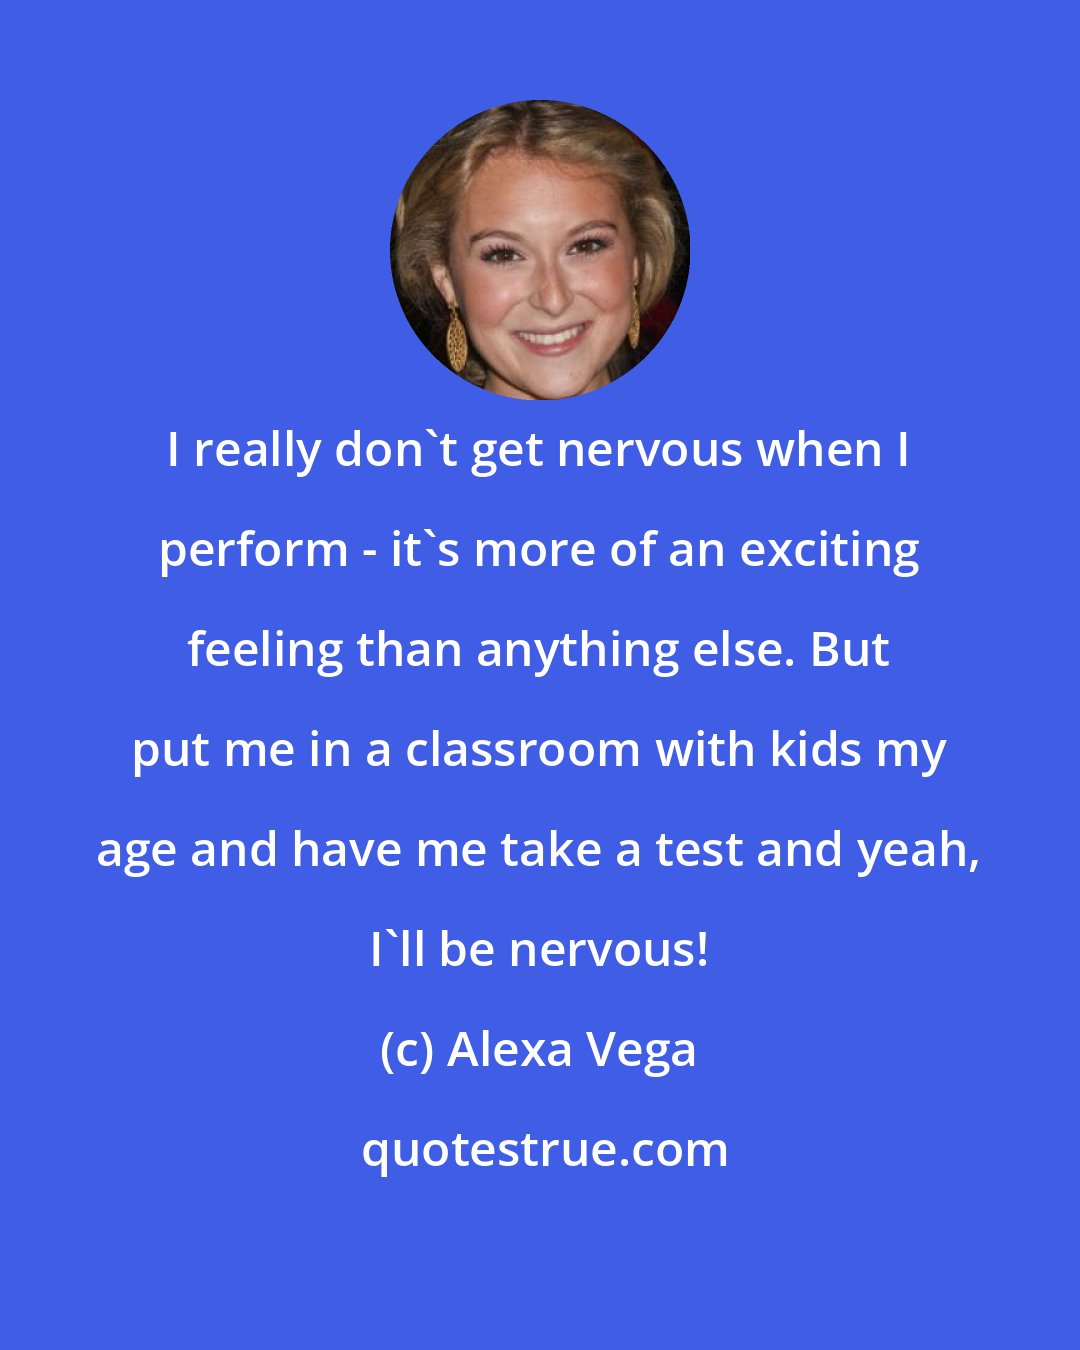 Alexa Vega: I really don't get nervous when I perform - it's more of an exciting feeling than anything else. But put me in a classroom with kids my age and have me take a test and yeah, I'll be nervous!